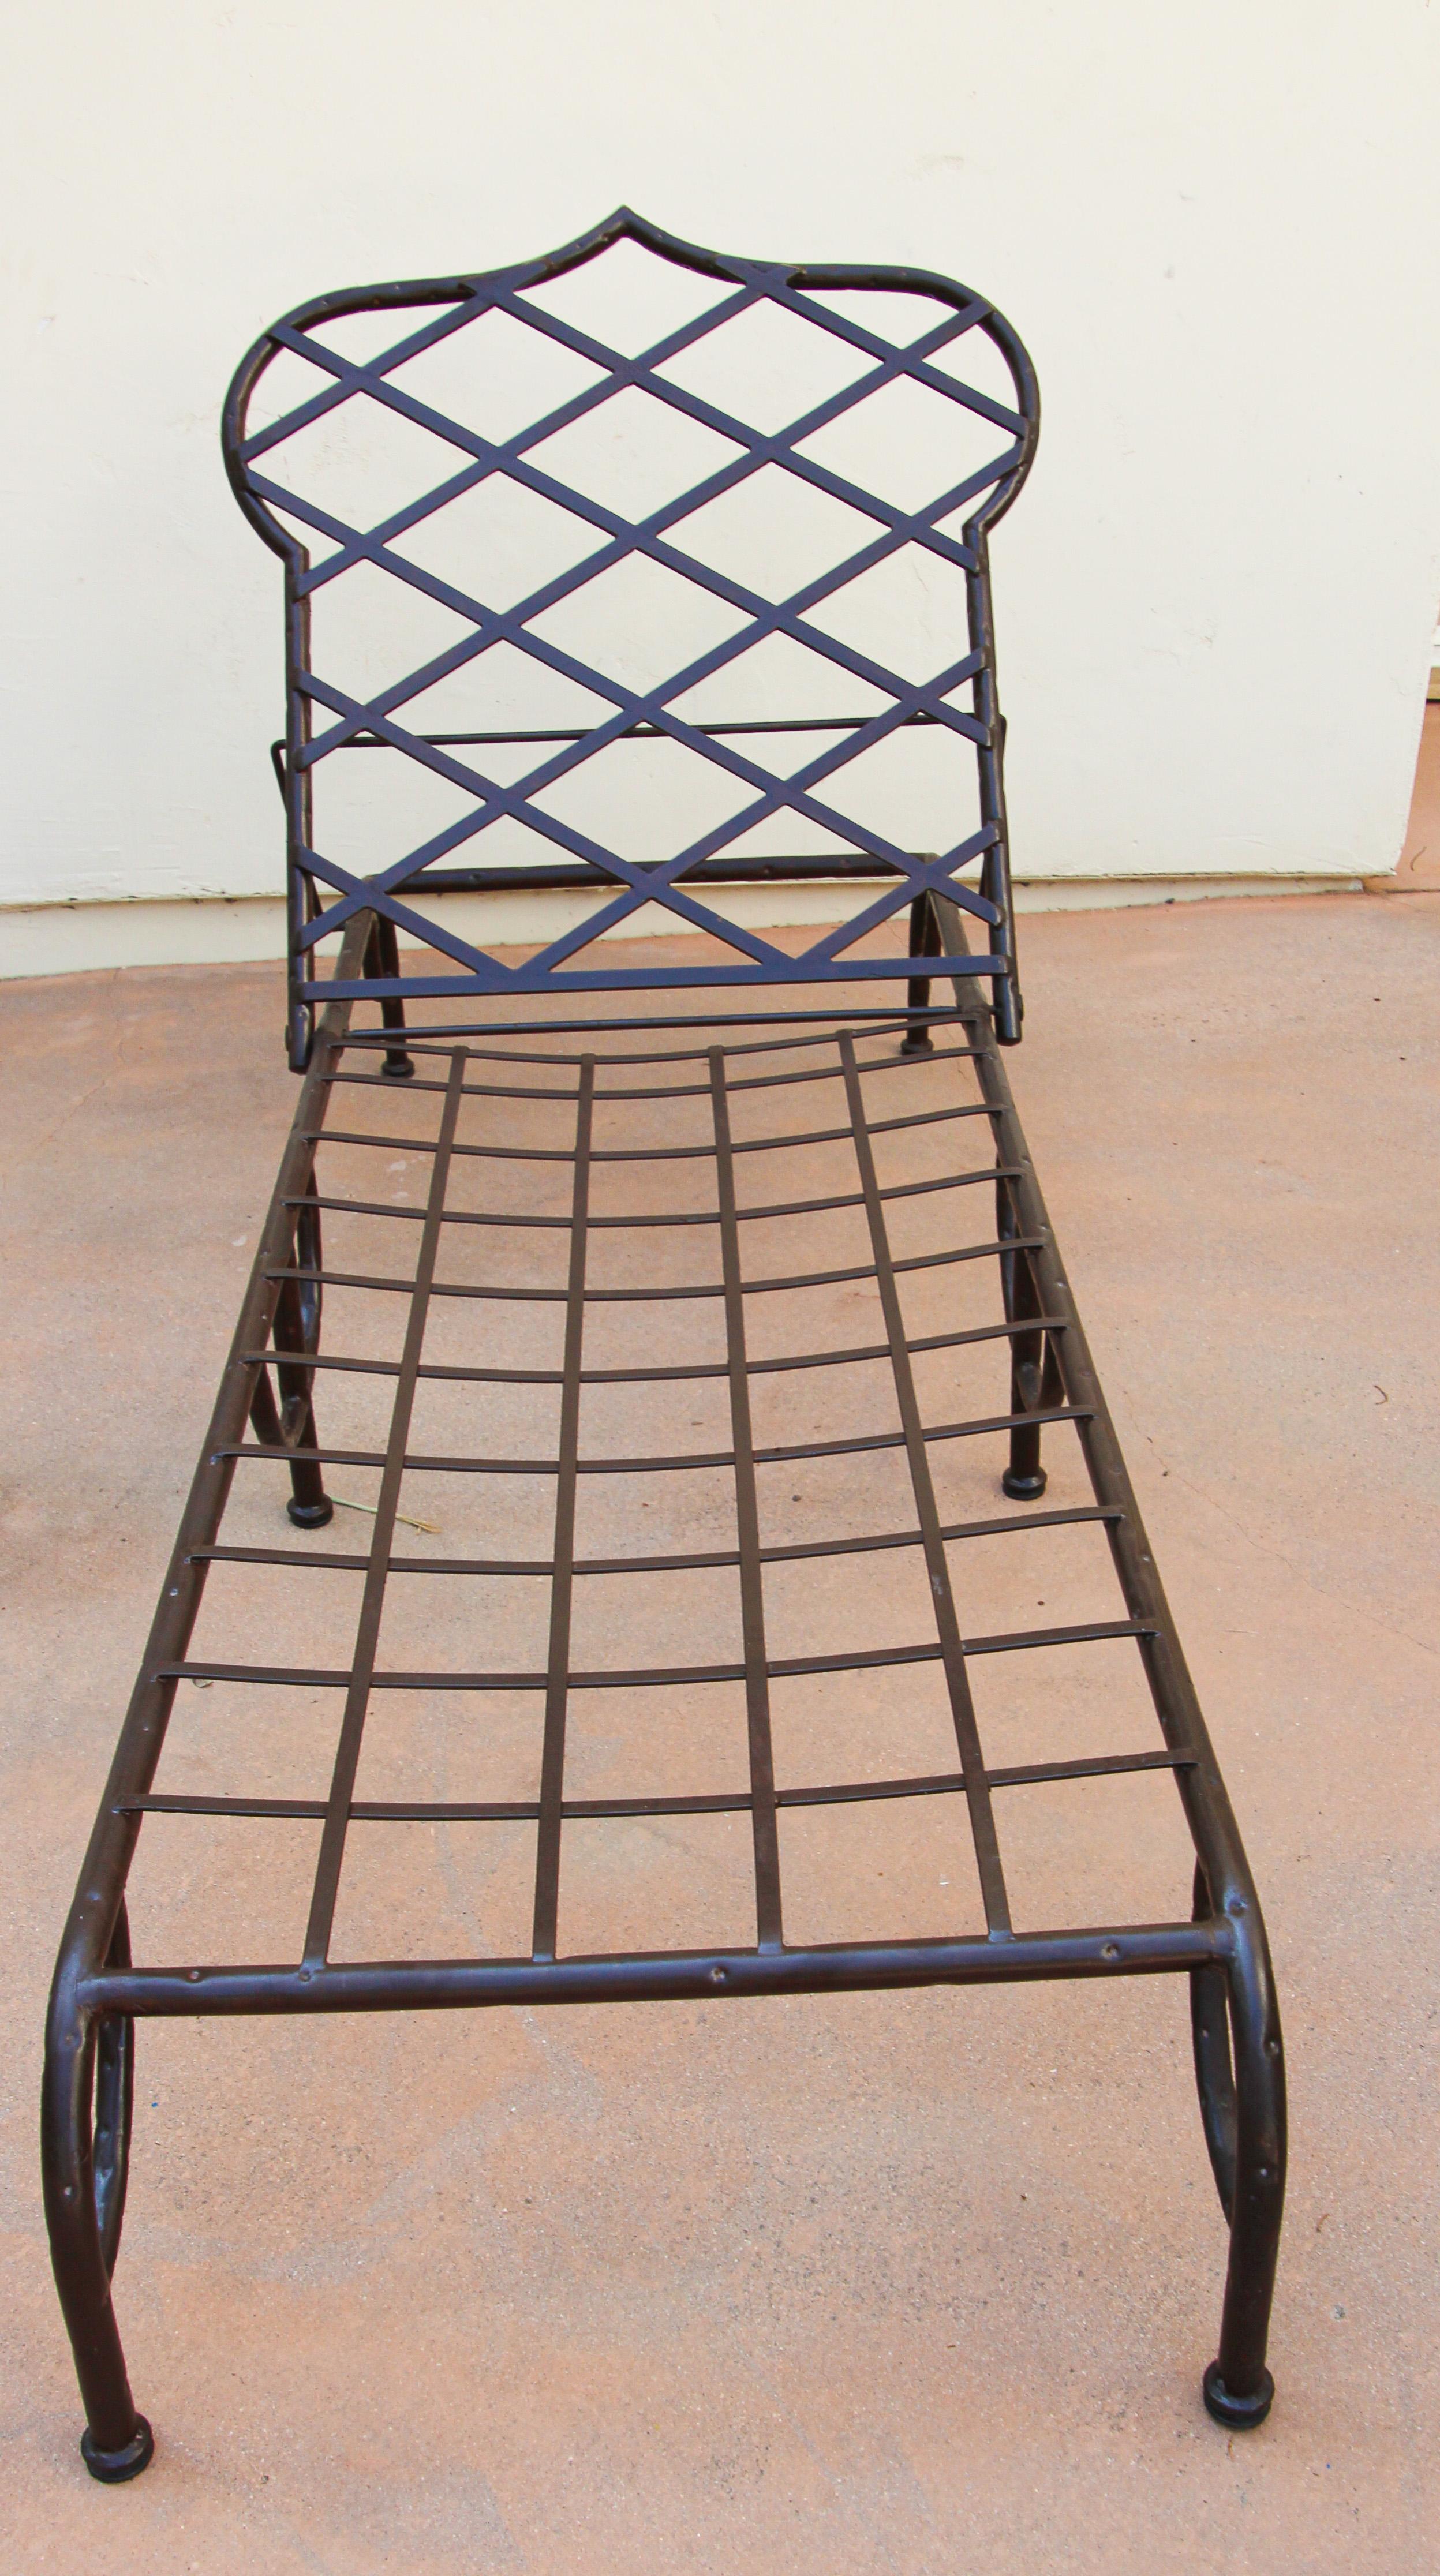 American Outdoor Metal Lounge Chair in Mario Papperzini Style Moorish Backrest Design